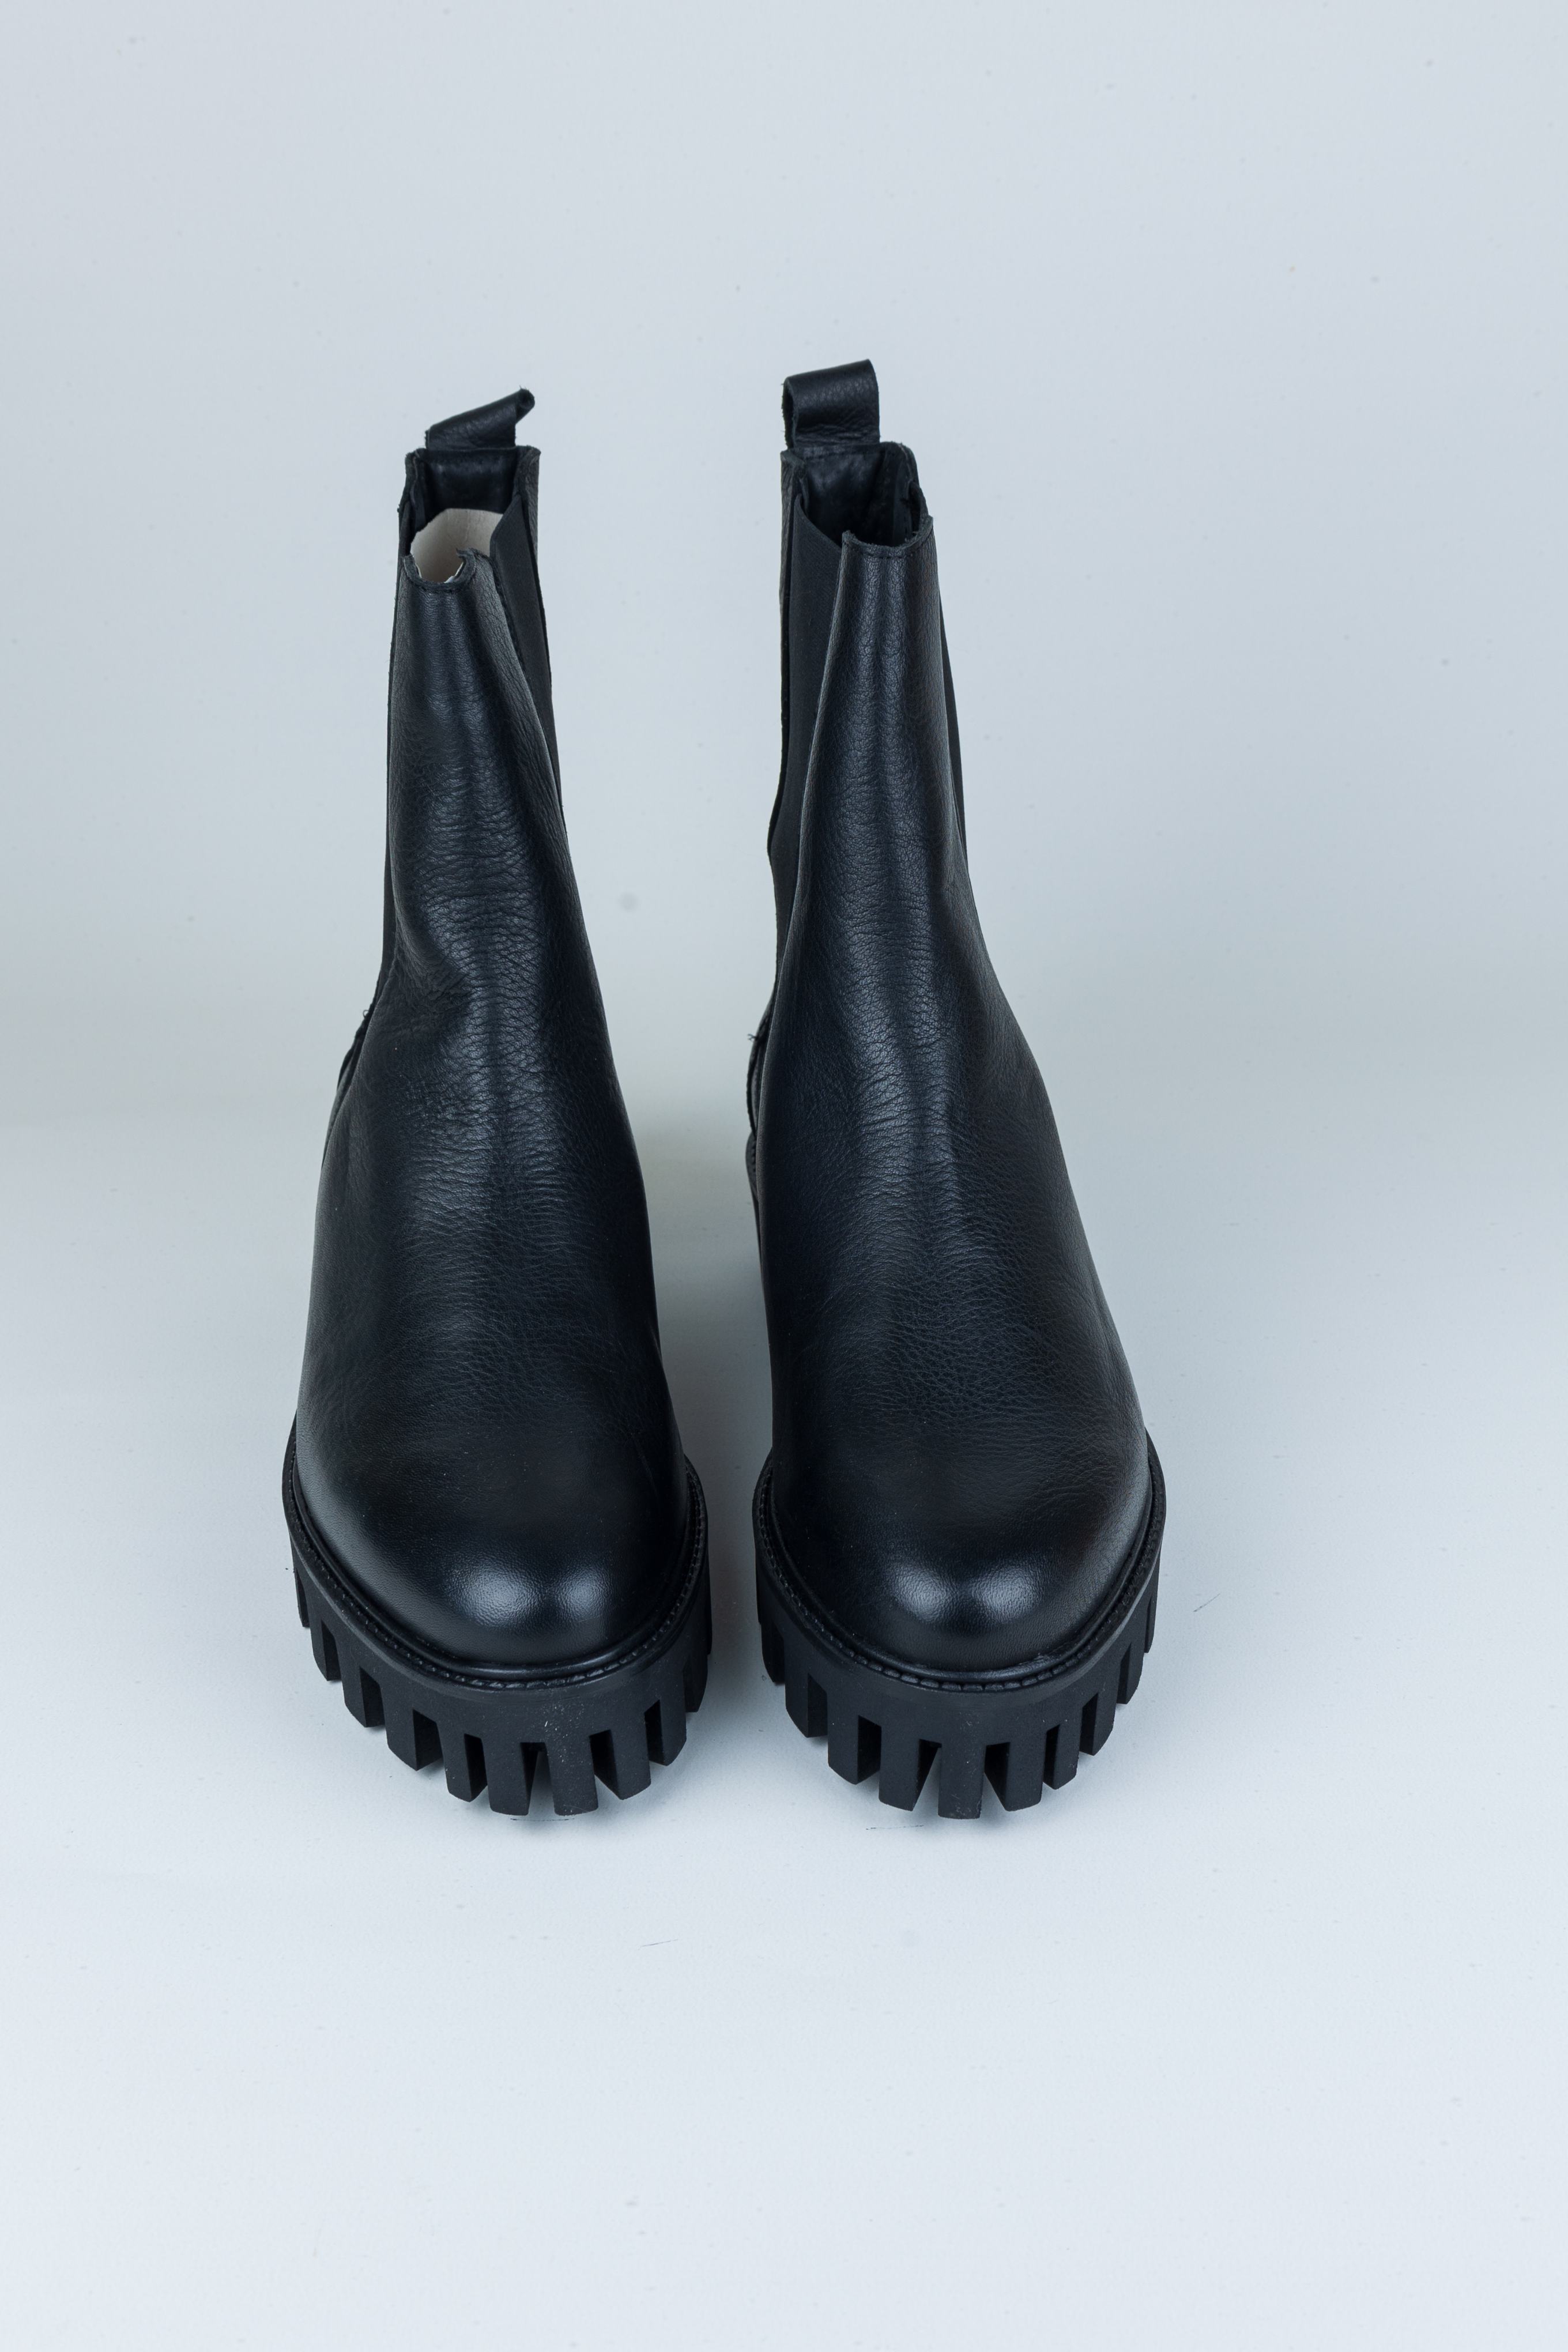 OU - BEE CARTEL 6-A BOOT - BLACK LEATHER